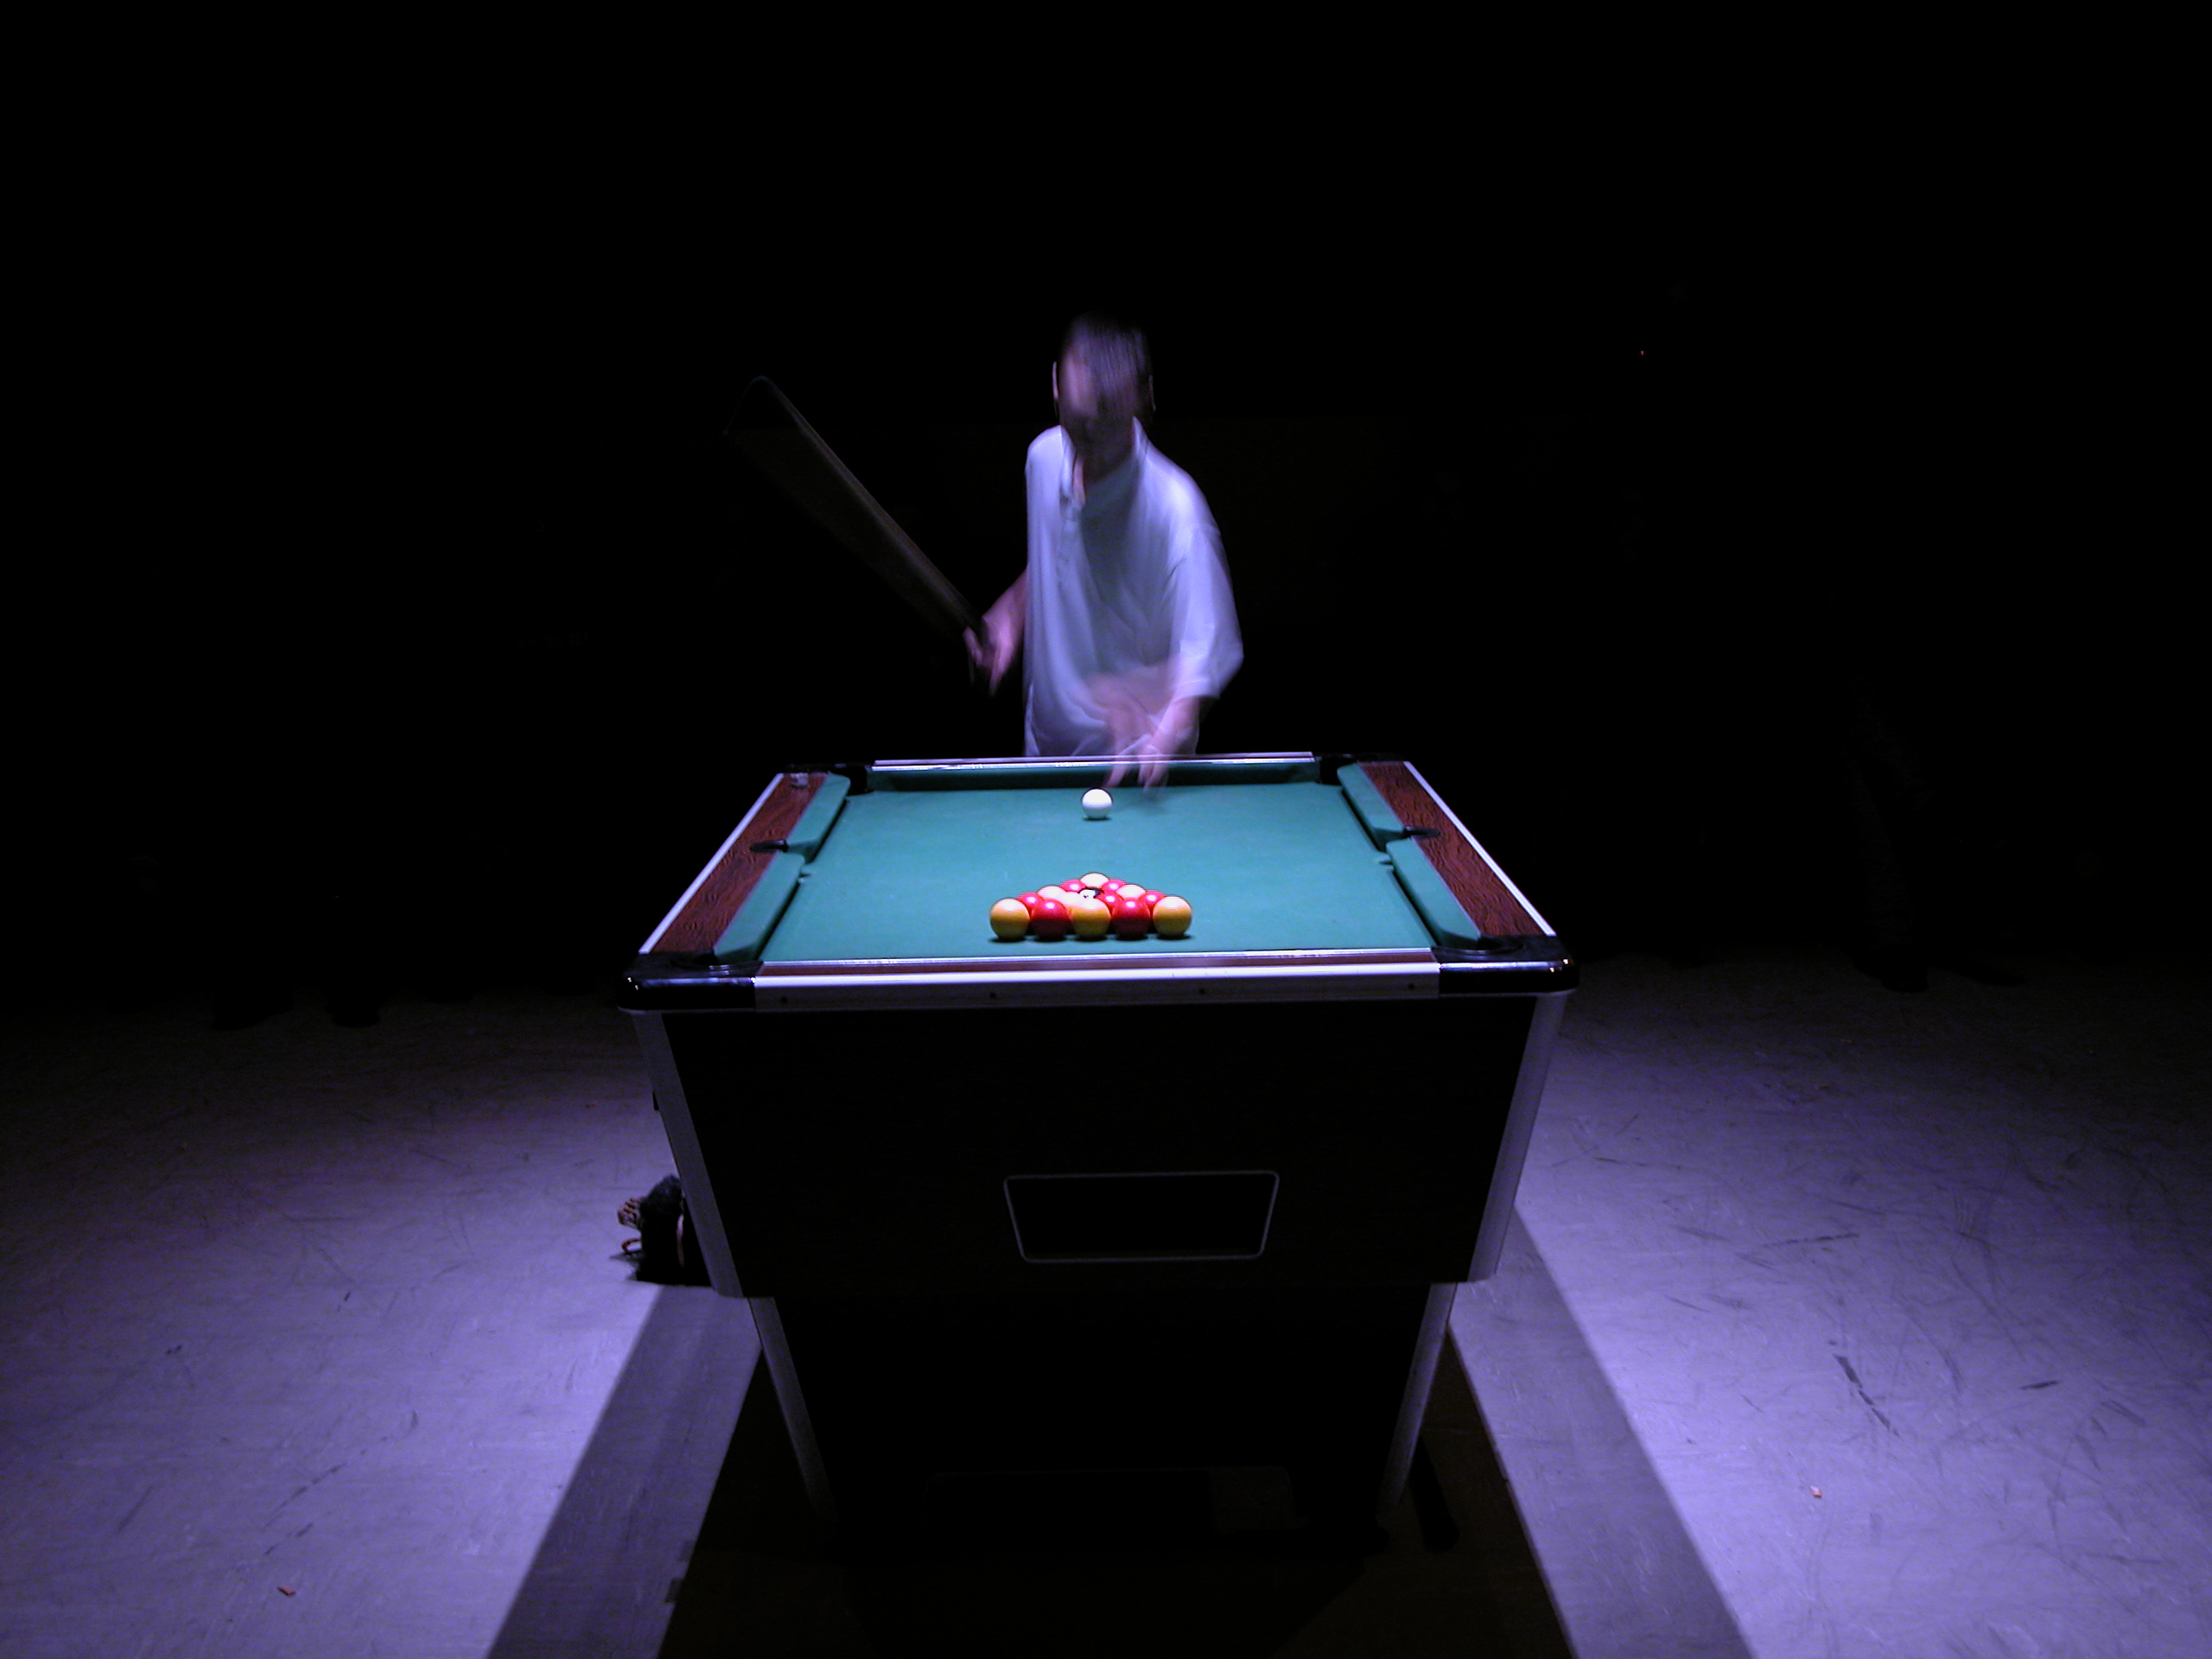 A pool table in sharp focus with a blurred person in a white shirt holding a cue